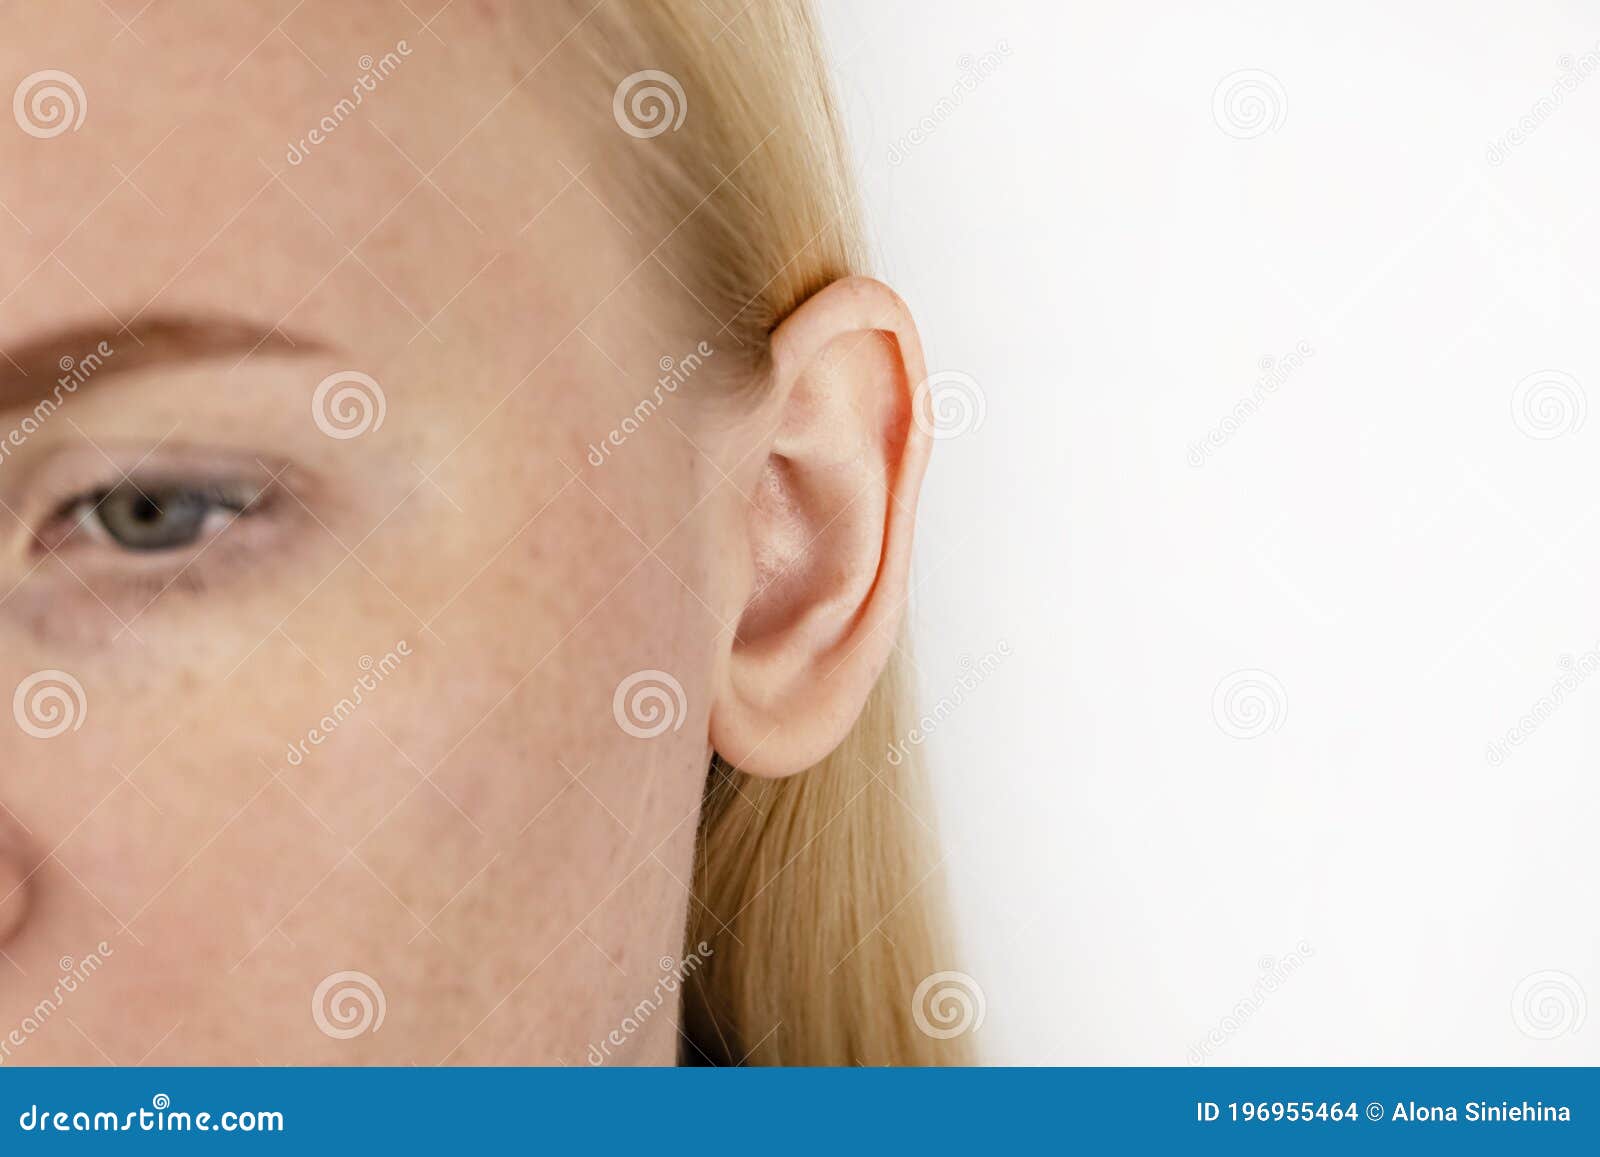 darwin`s tubercle on the ear. the girl at the reception at the plastic surgeon, shows the auricle